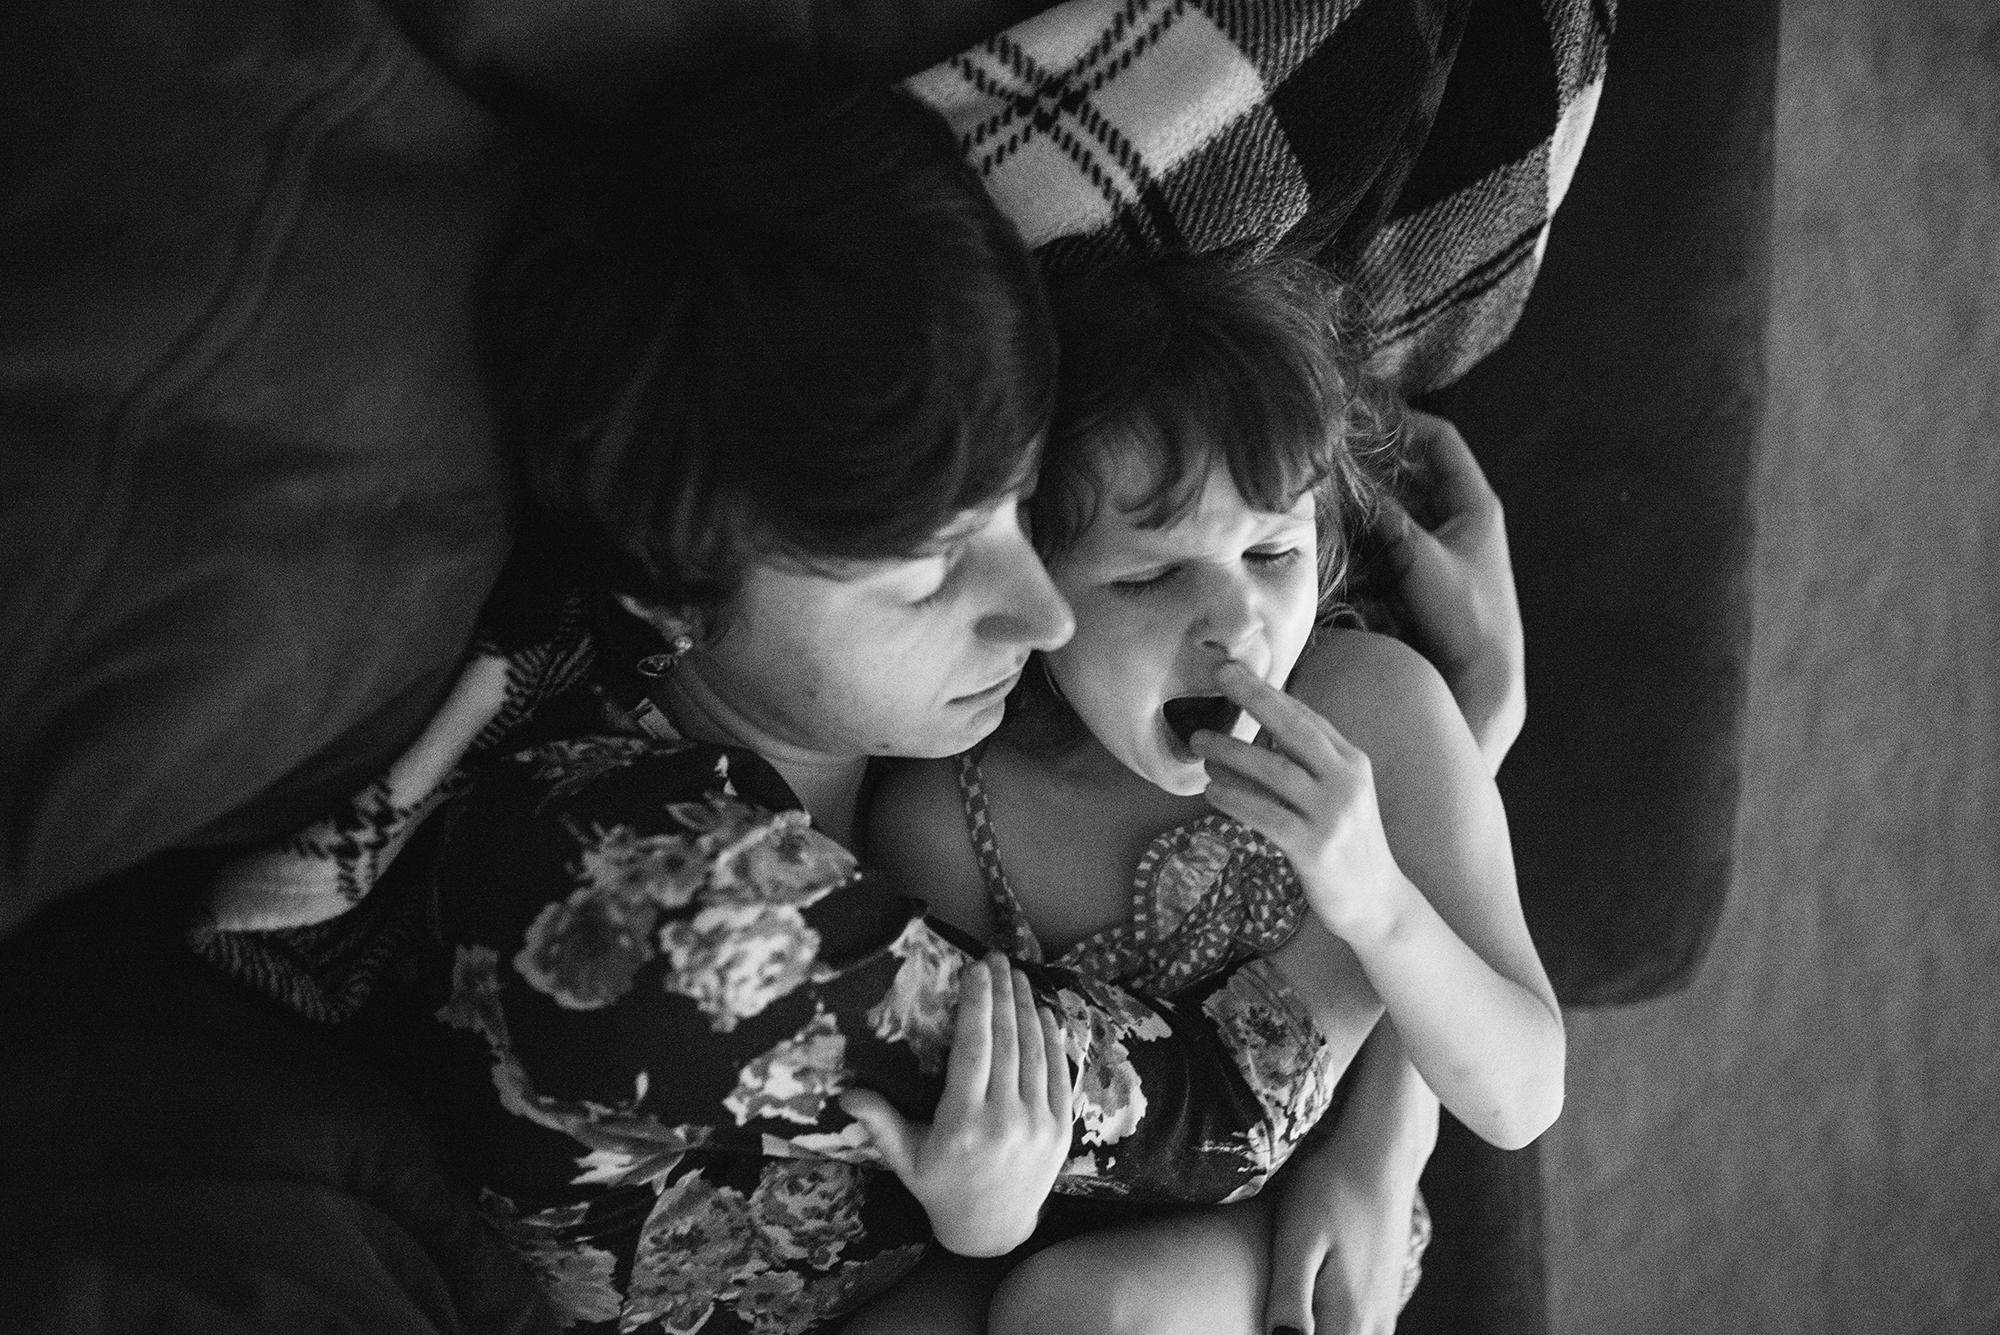 individual snuggling young child - Documentary Family Photography